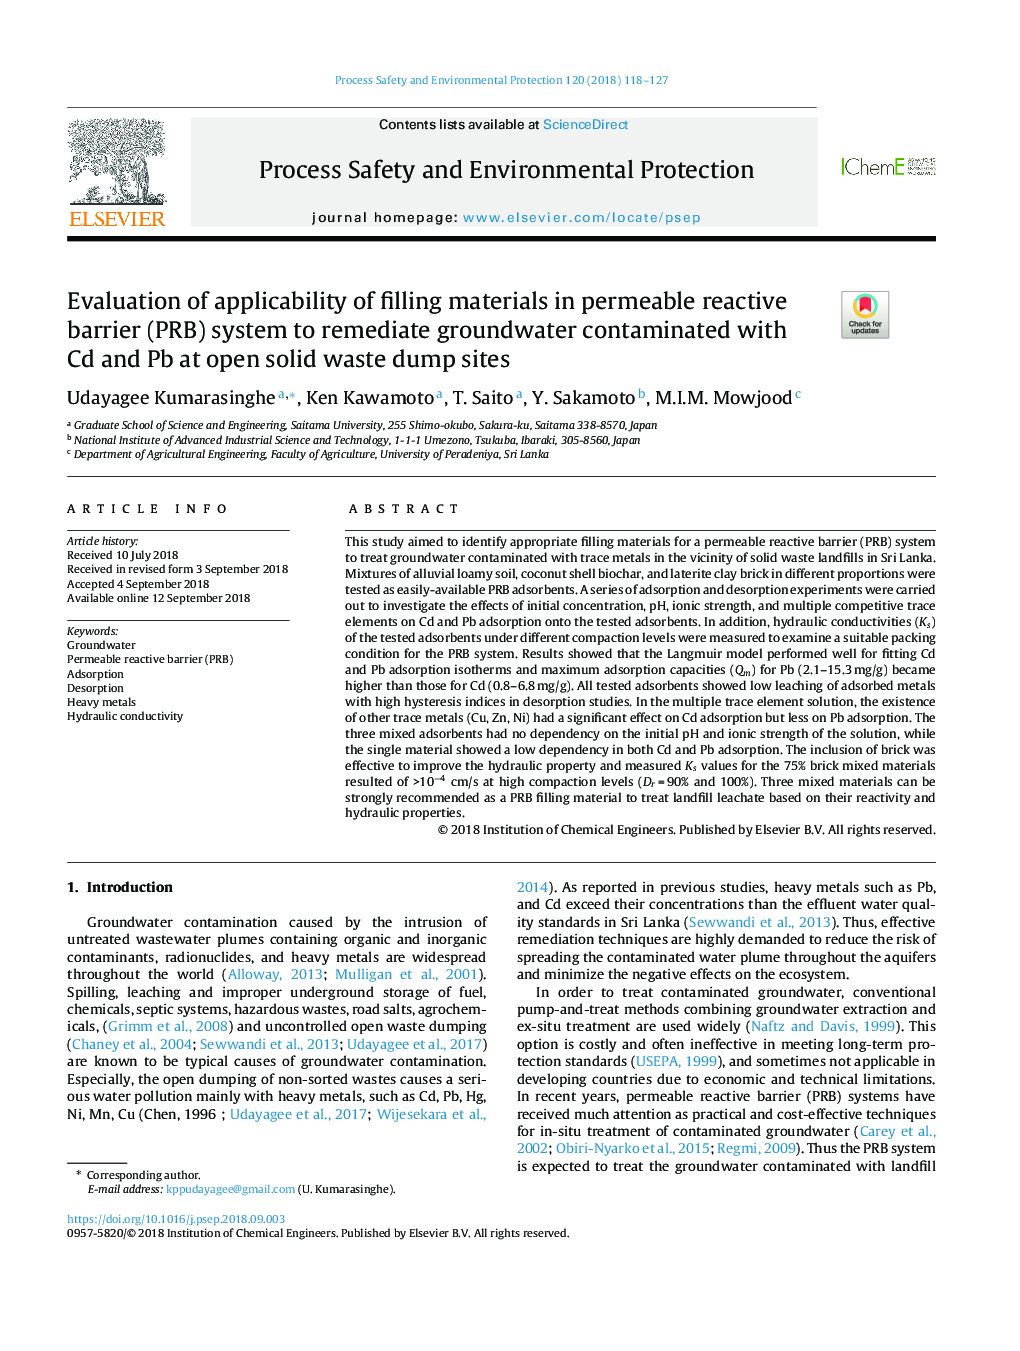 Evaluation of applicability of filling materials in permeable reactive barrier (PRB) system to remediate groundwater contaminated with Cd and Pb at open solid waste dump sites